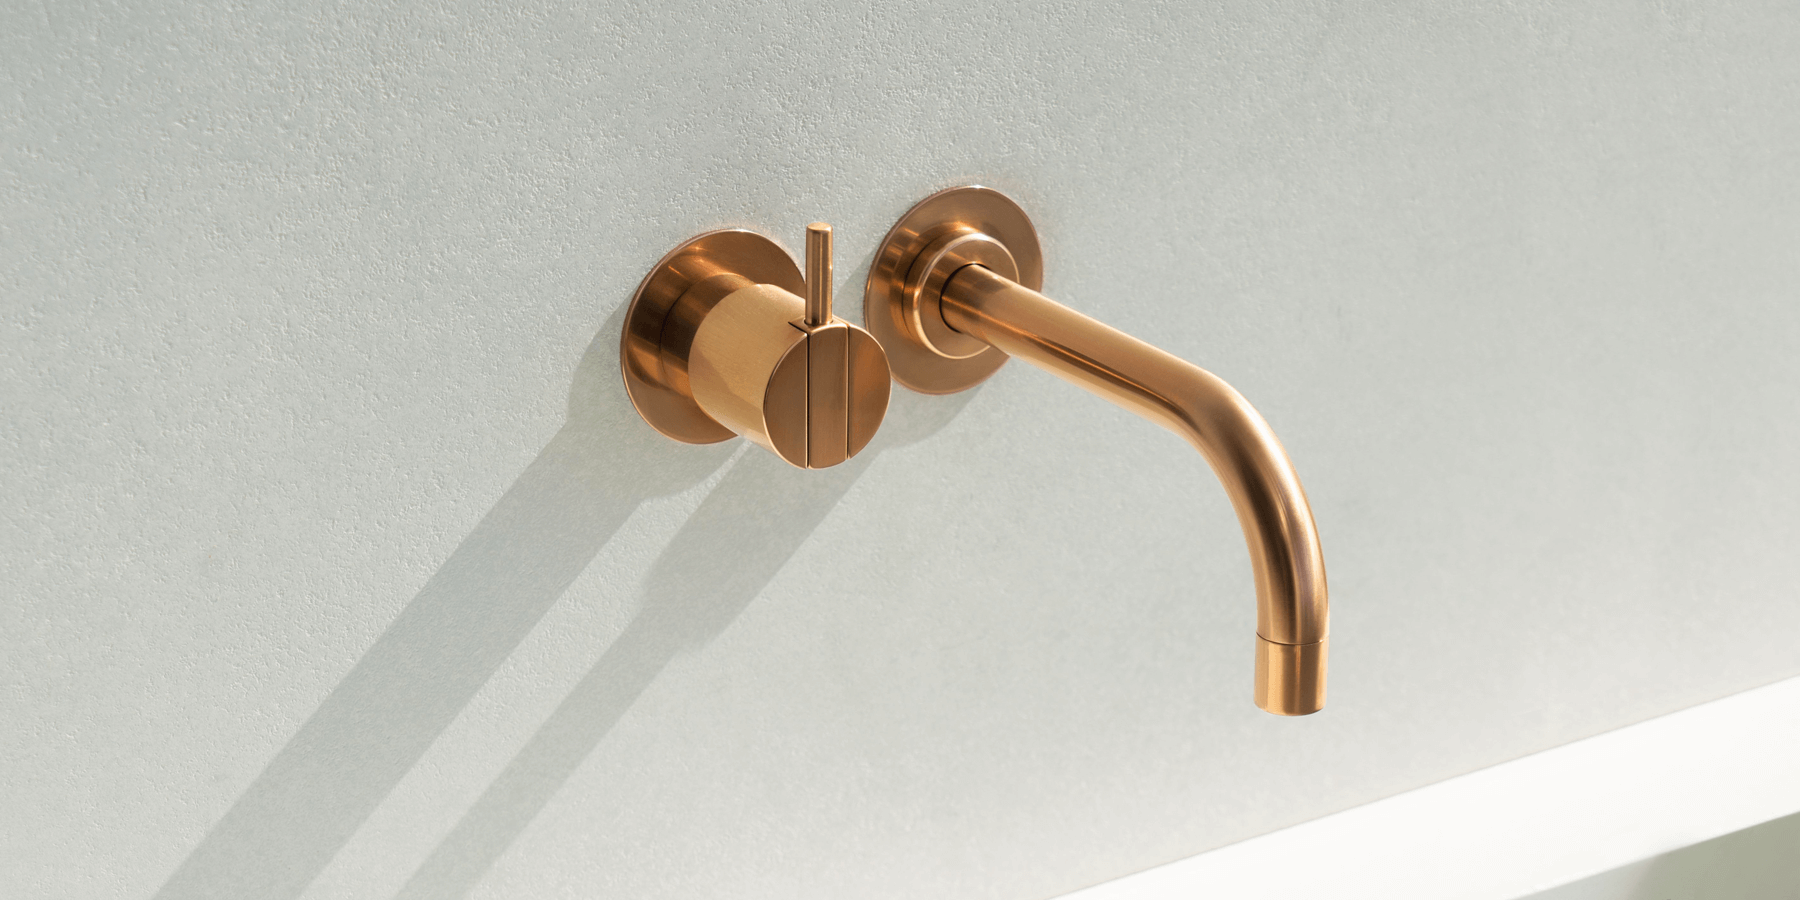 Bronze VOLA Faucet mounted on a wall above a sink